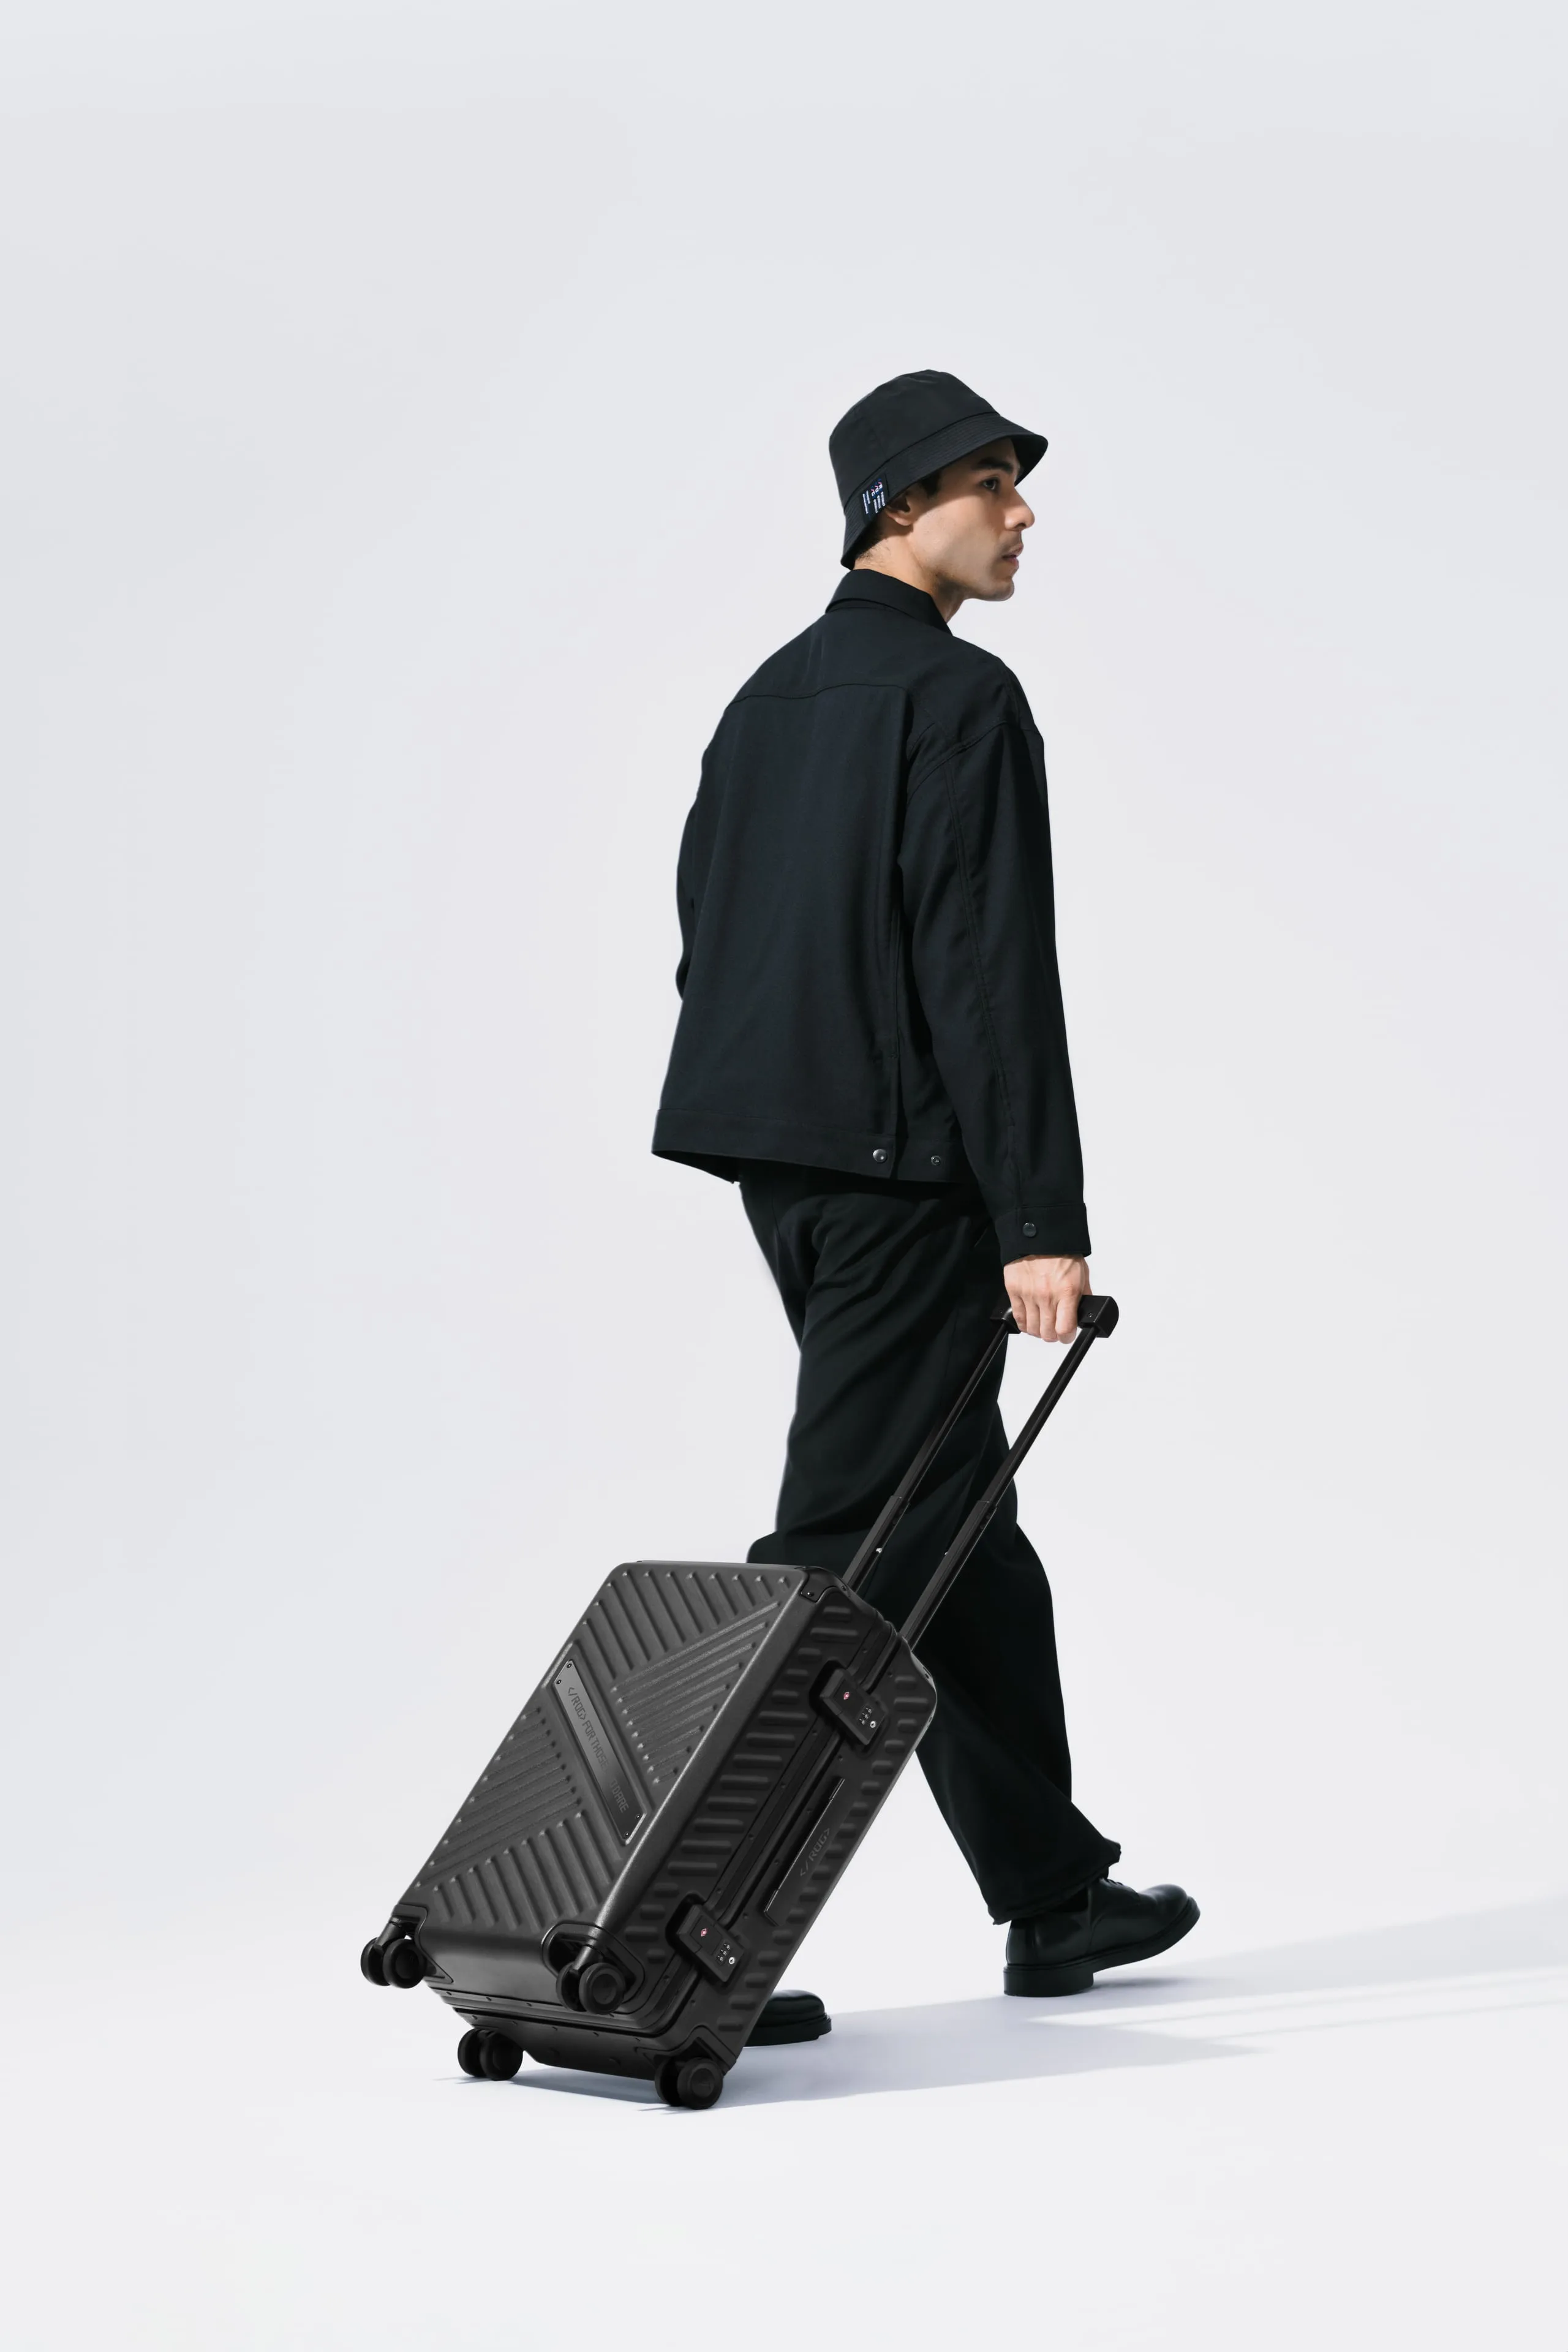 Man in all black, pulling the ROG SLASH Hard Case Luggage behind him and looking over his shoulder